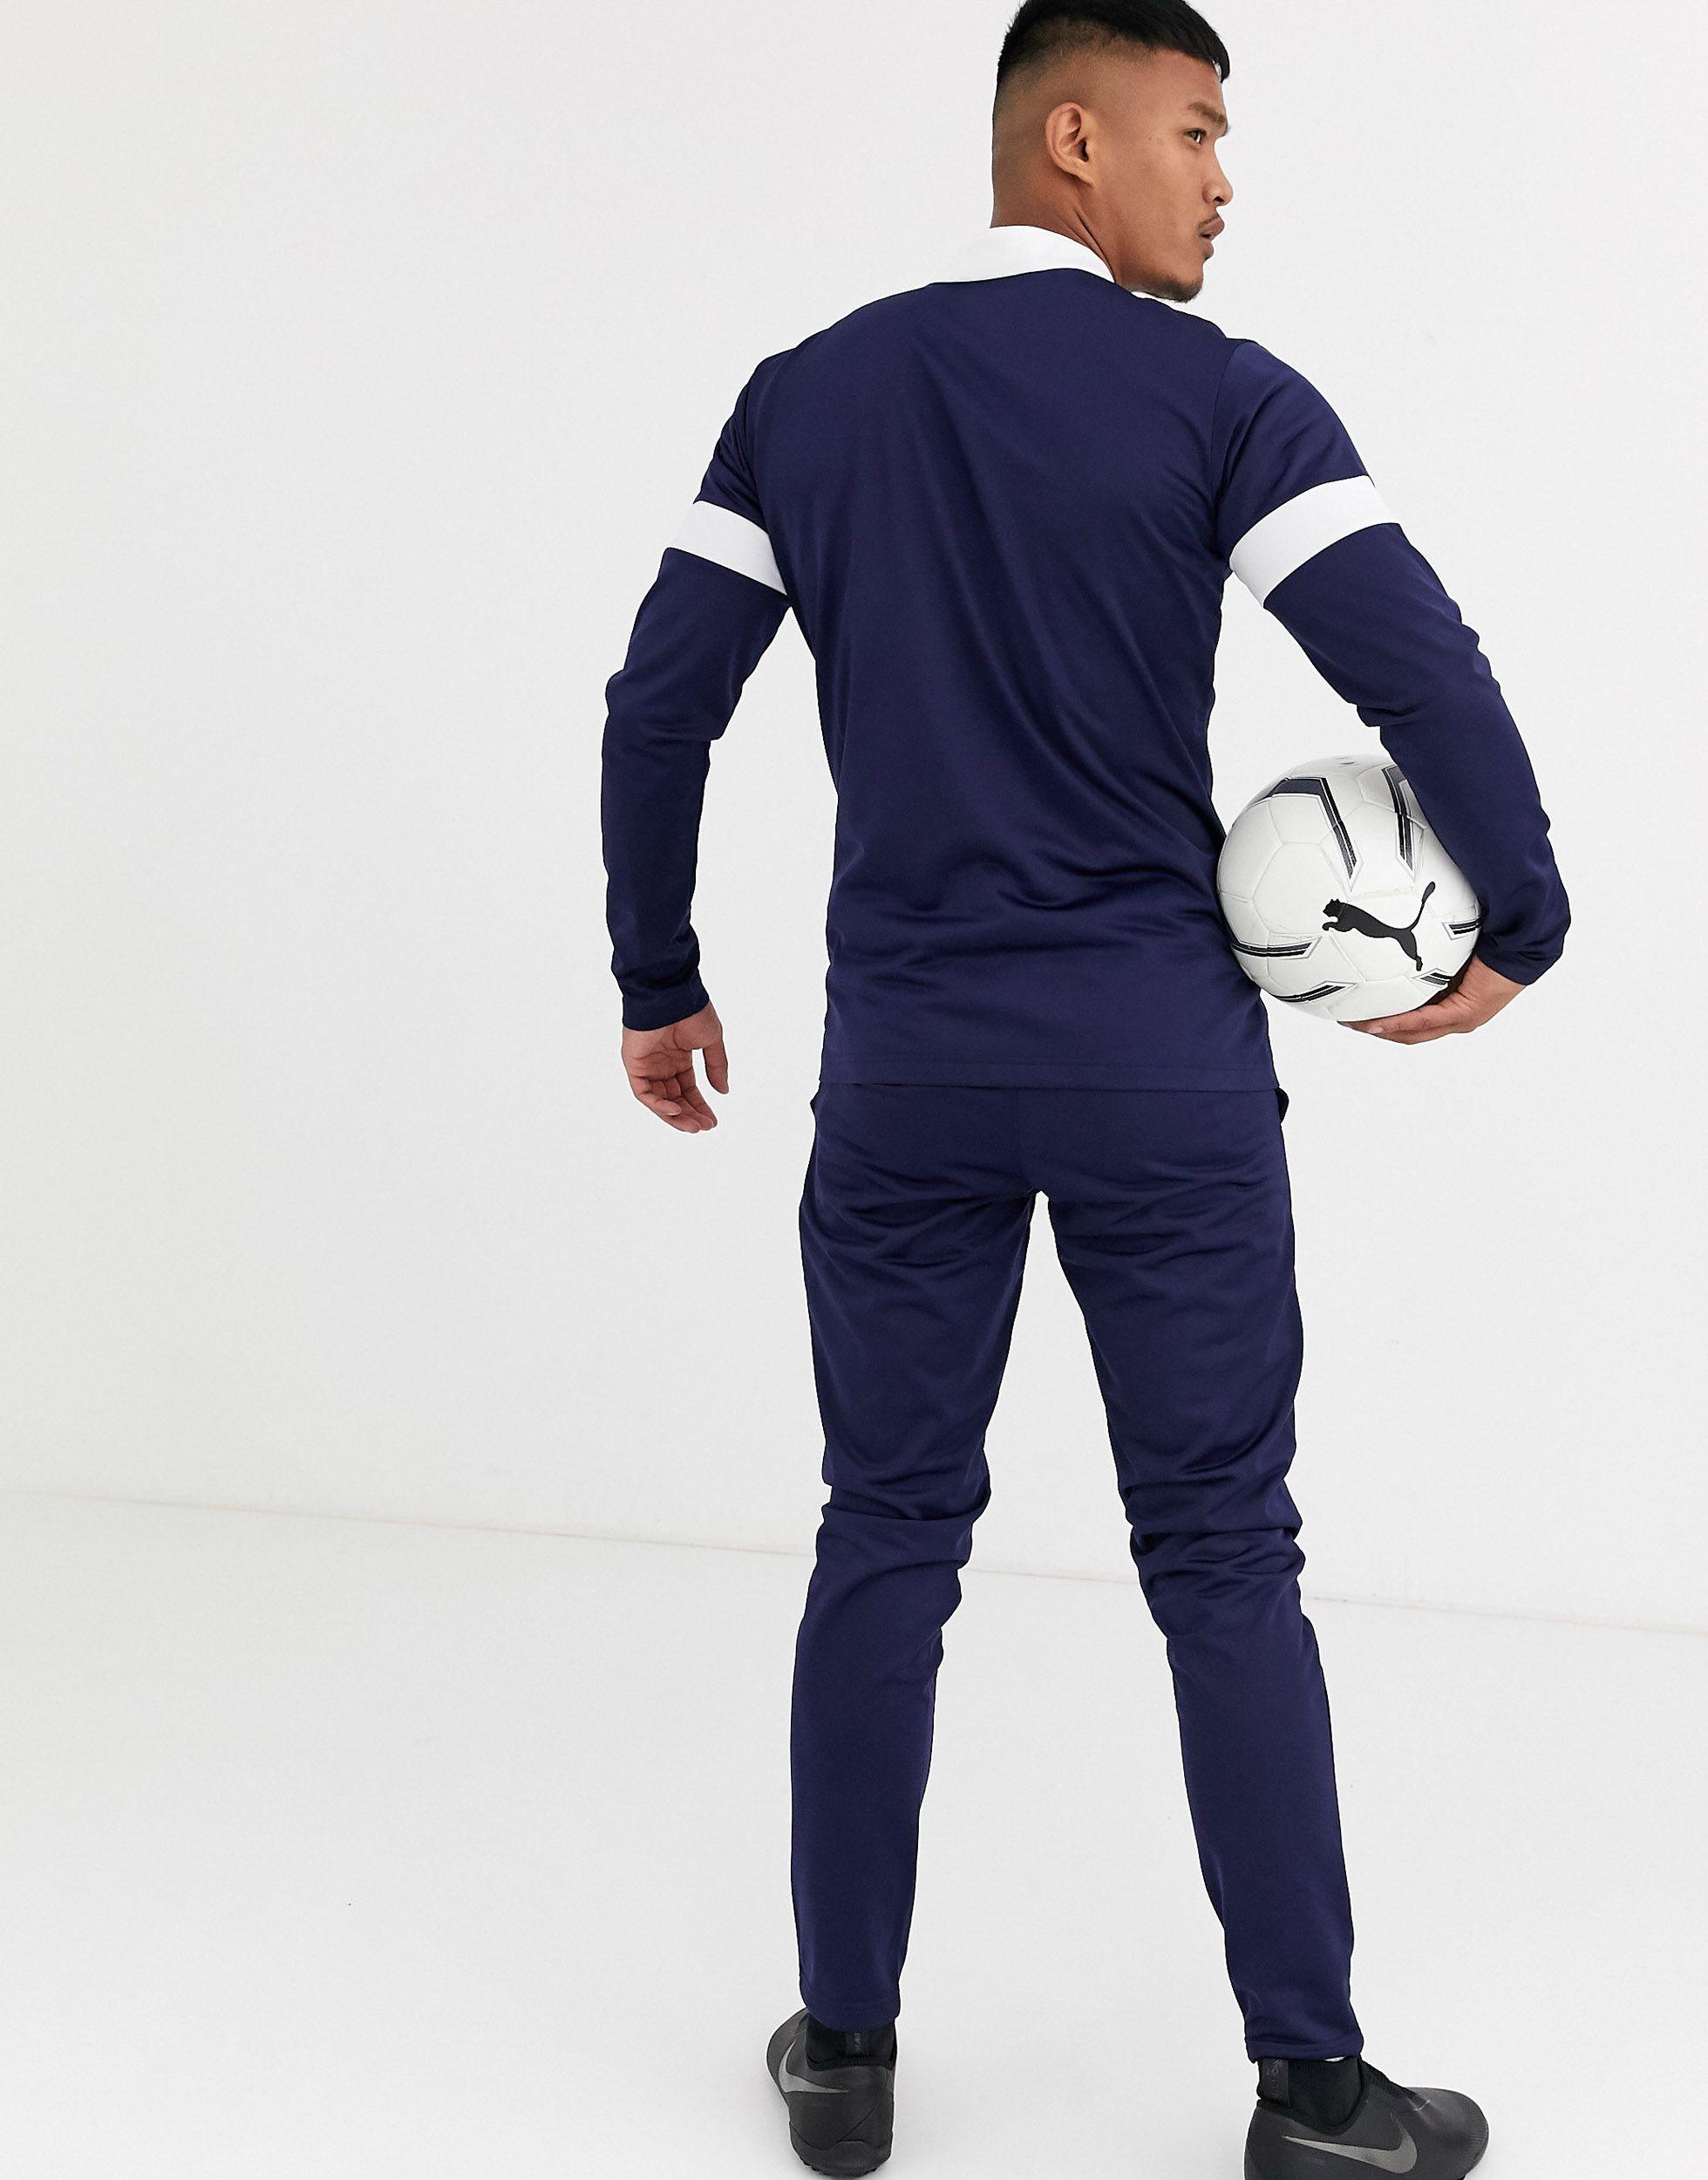 PUMA Synthetic Football Tracksuit in Navy (Blue) for Men - Lyst